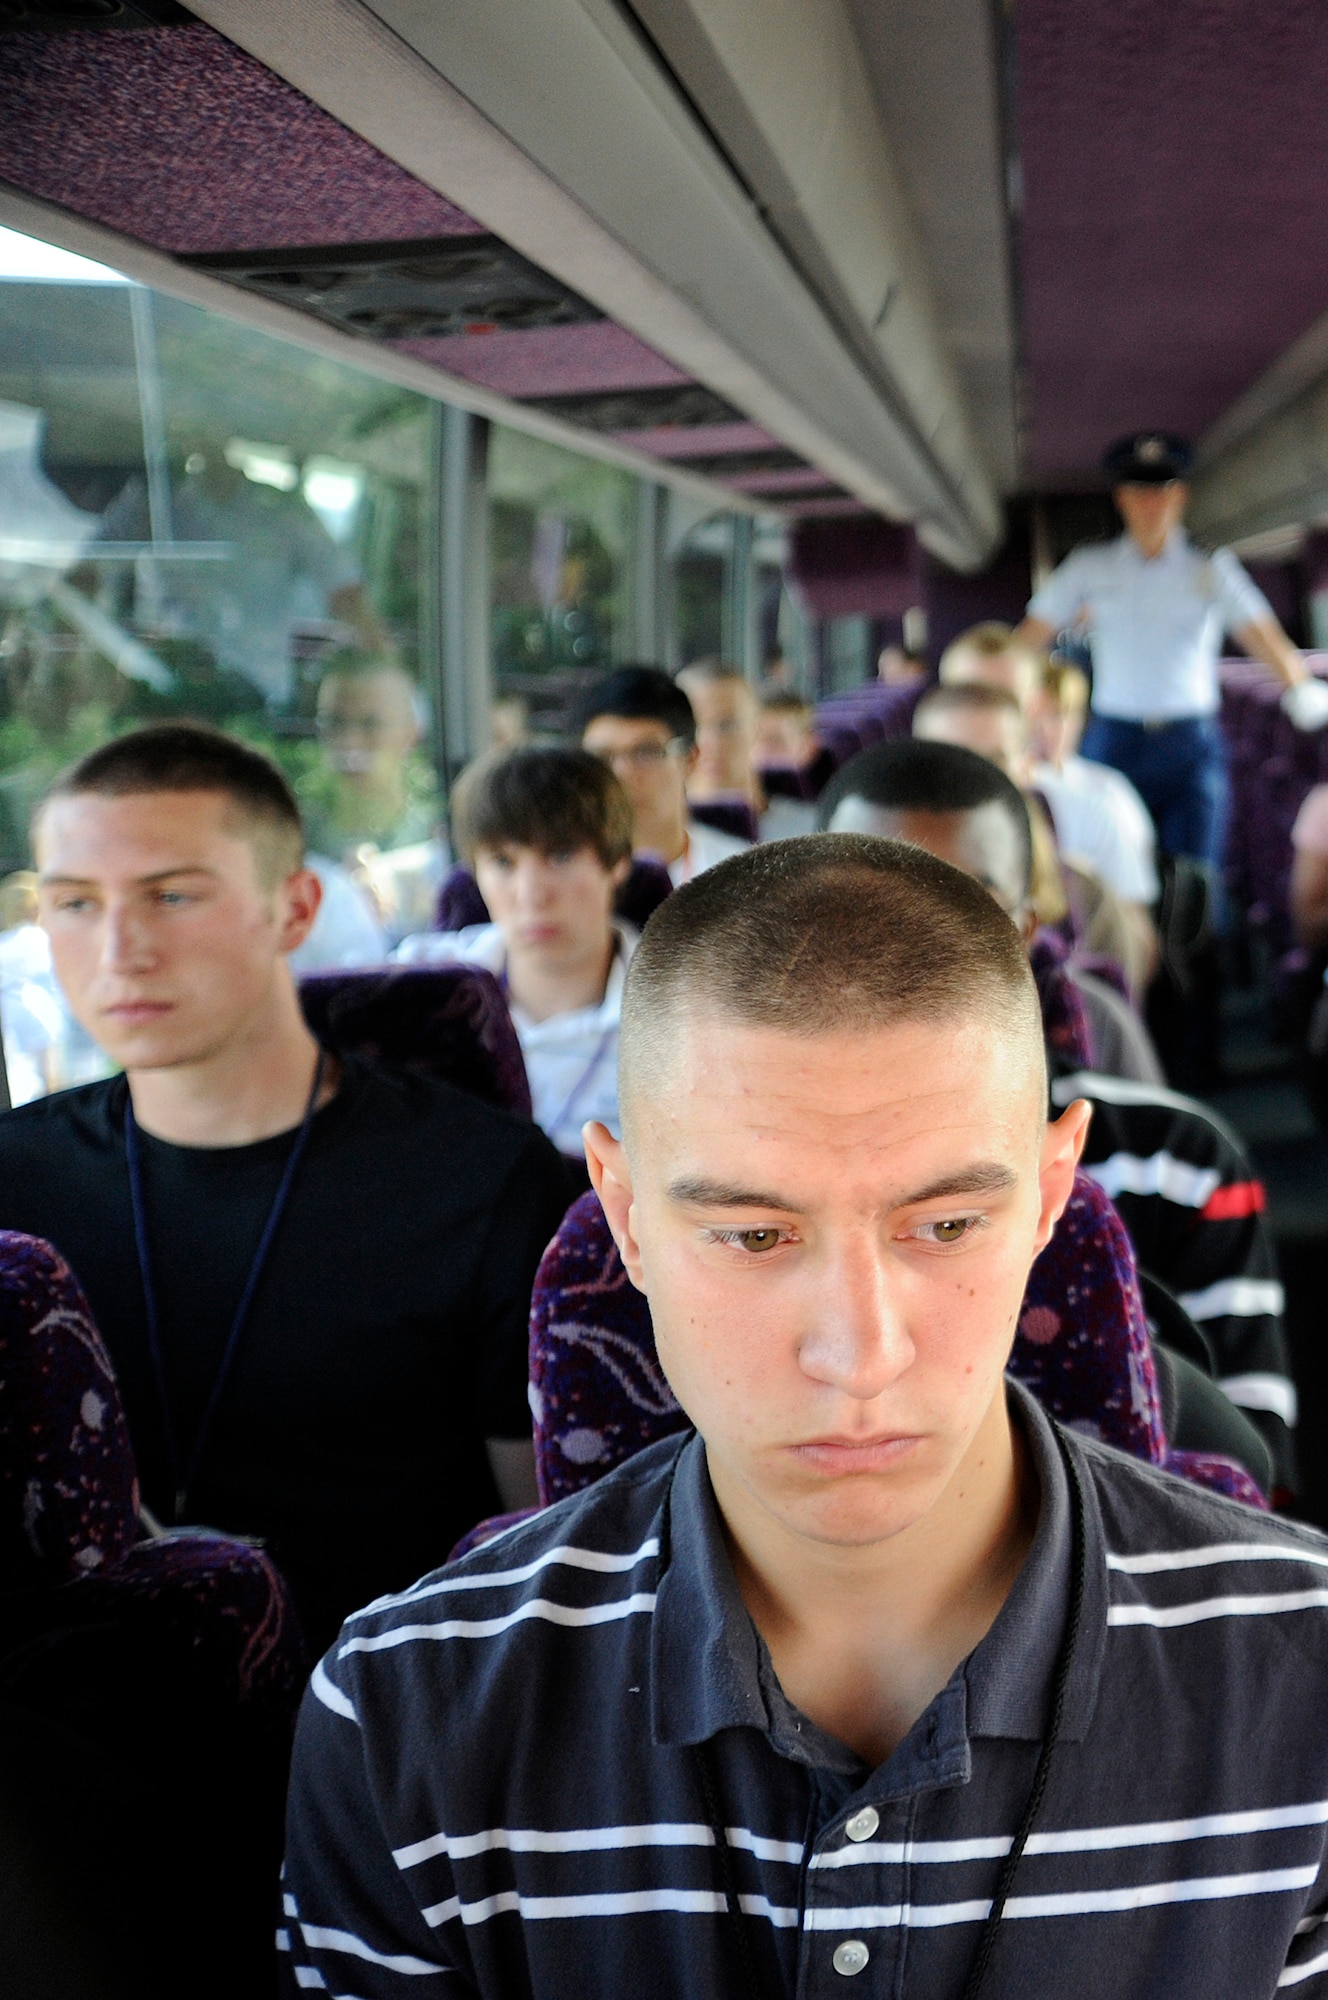 Basic cadets ride in a bus from Doolittle Hall to the cadet area at the U.S. Air Force Academy during cadet inprocessing at the U.S. Air Force Academy in Colorado Springs, Colo., June 25. More than 1,300 cadets were accepted to the Class of 2013 out of nearly 10,000 applicants. (U.S. Air Force photo/Mike Kaplan)